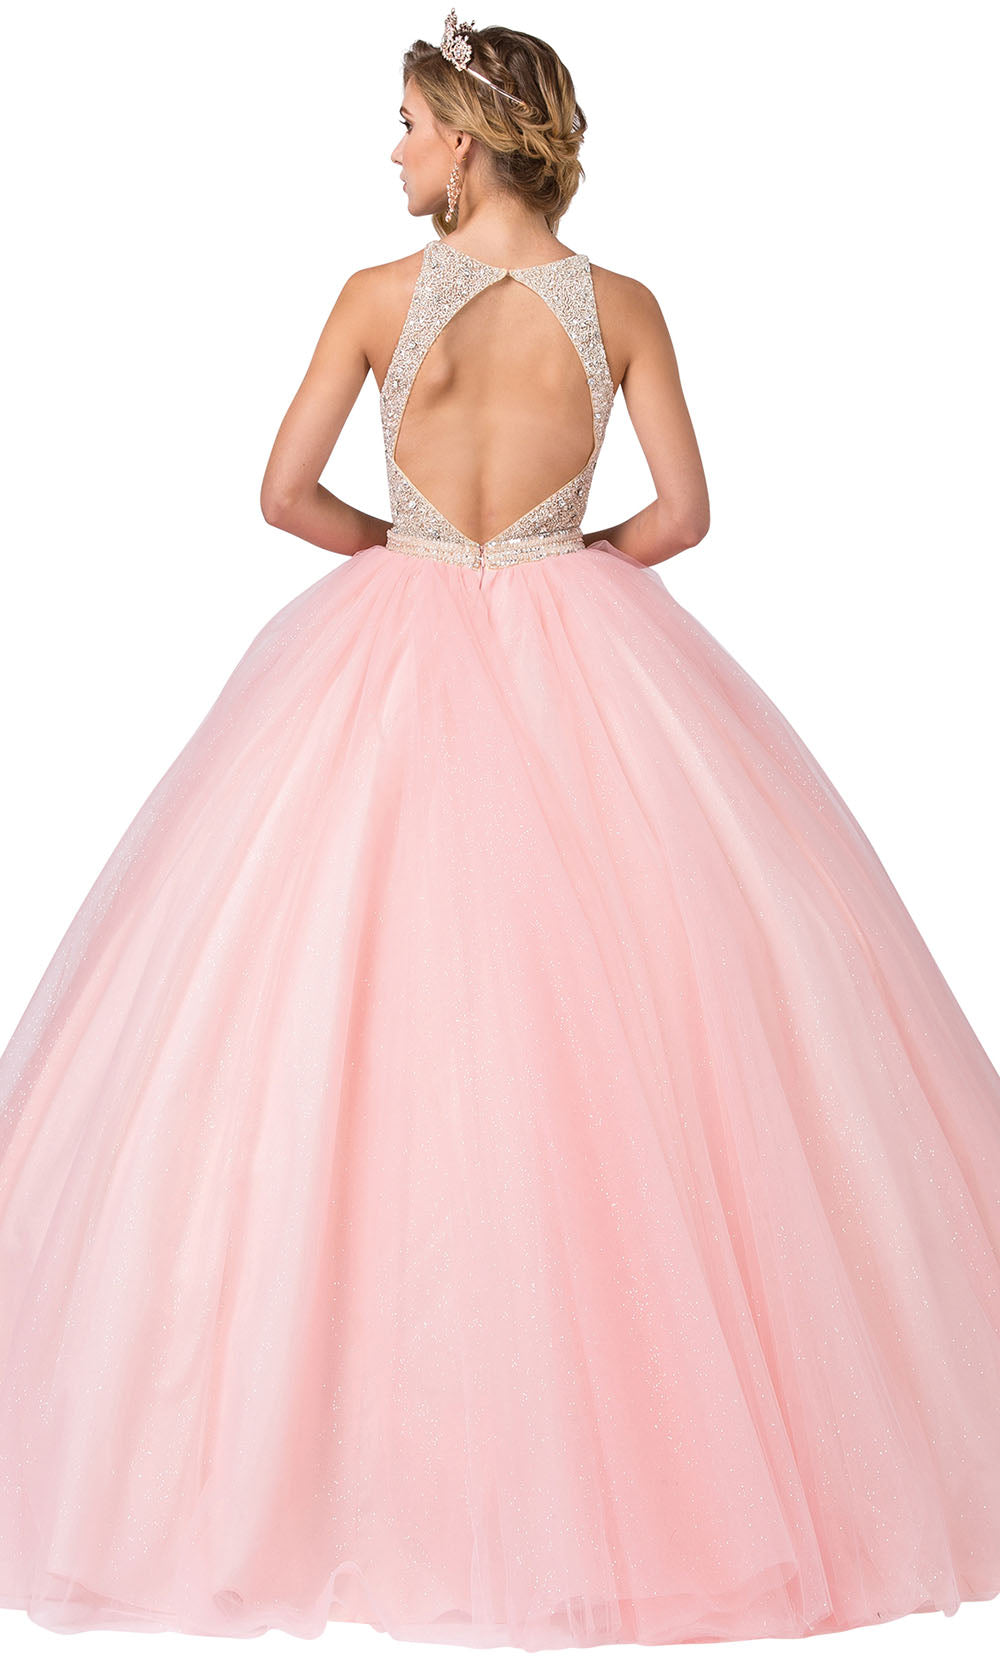 Dancing Queen - 1350 Jewel Accented Cutout Back Ballgown In Pink